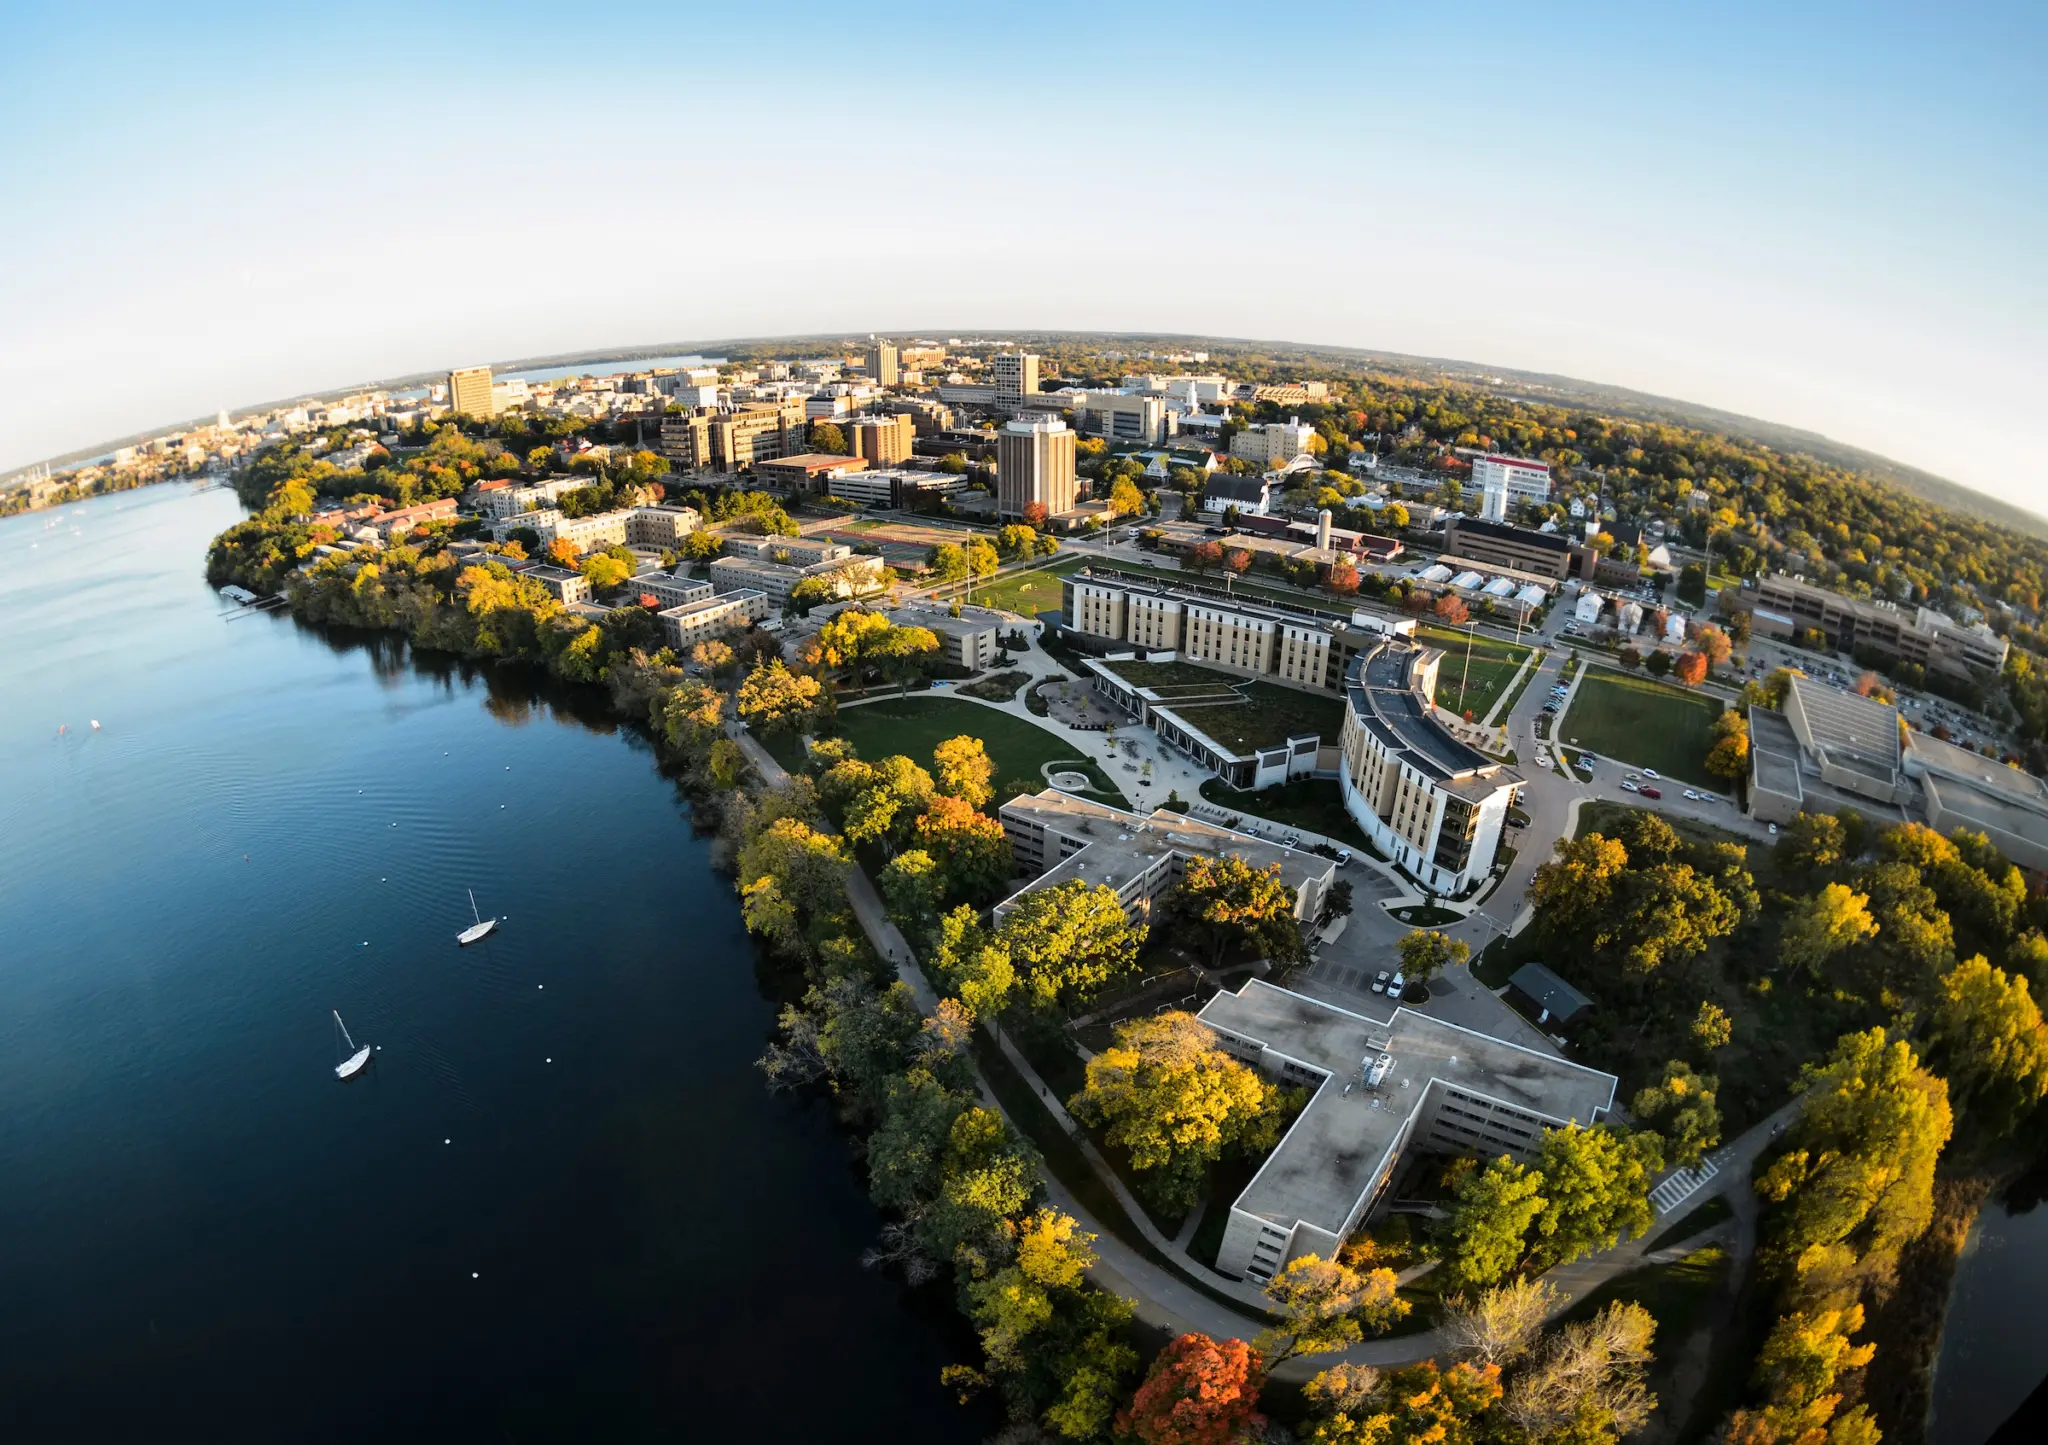 Aerial photo of campus buildings along lake